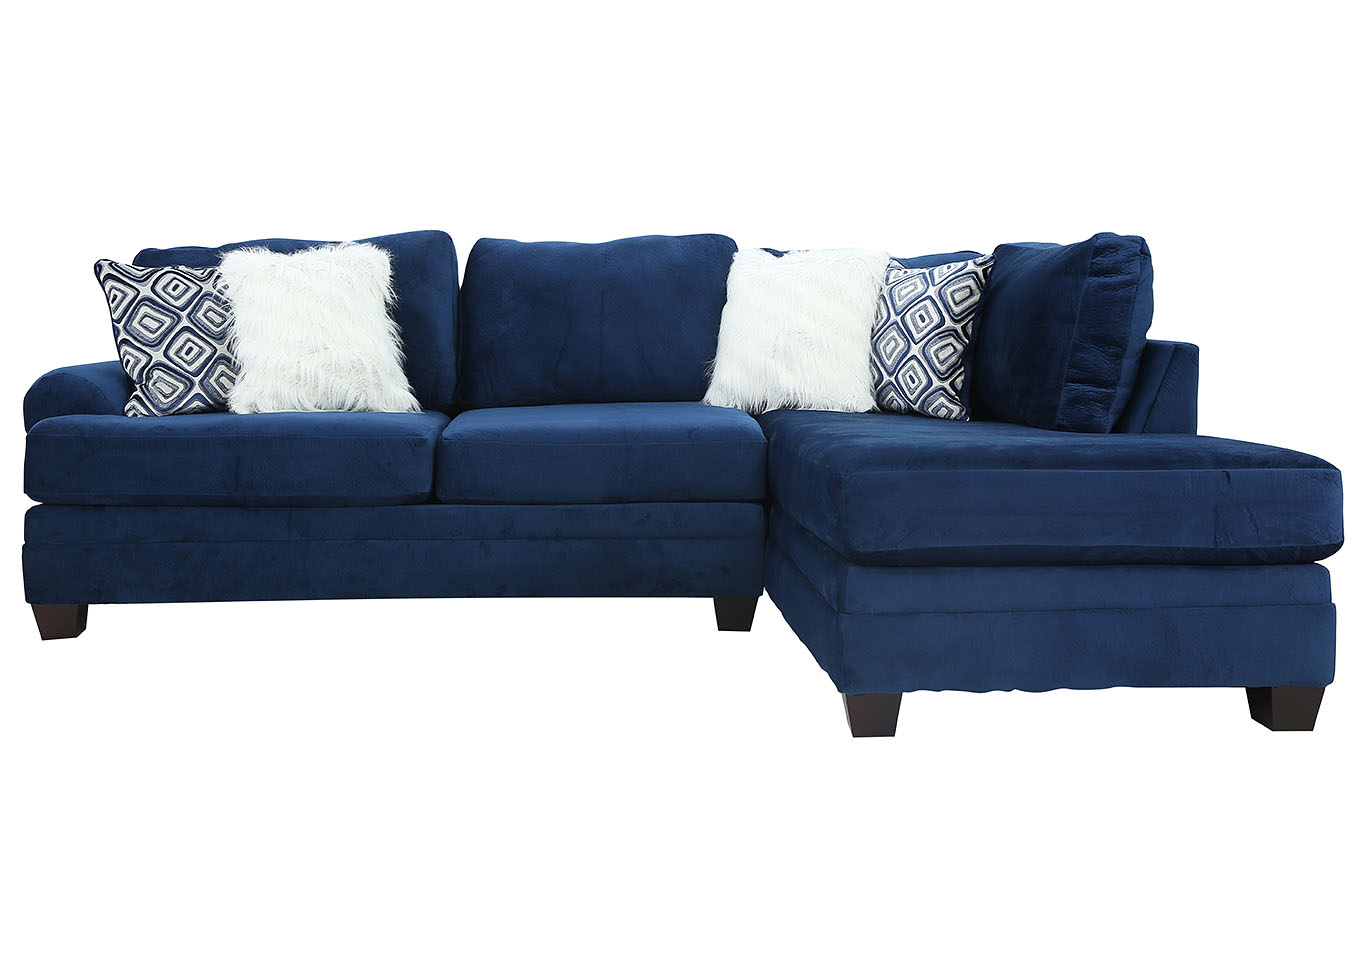 BRODIE GROOVY NAVY 2 PIECE SECTIONAL